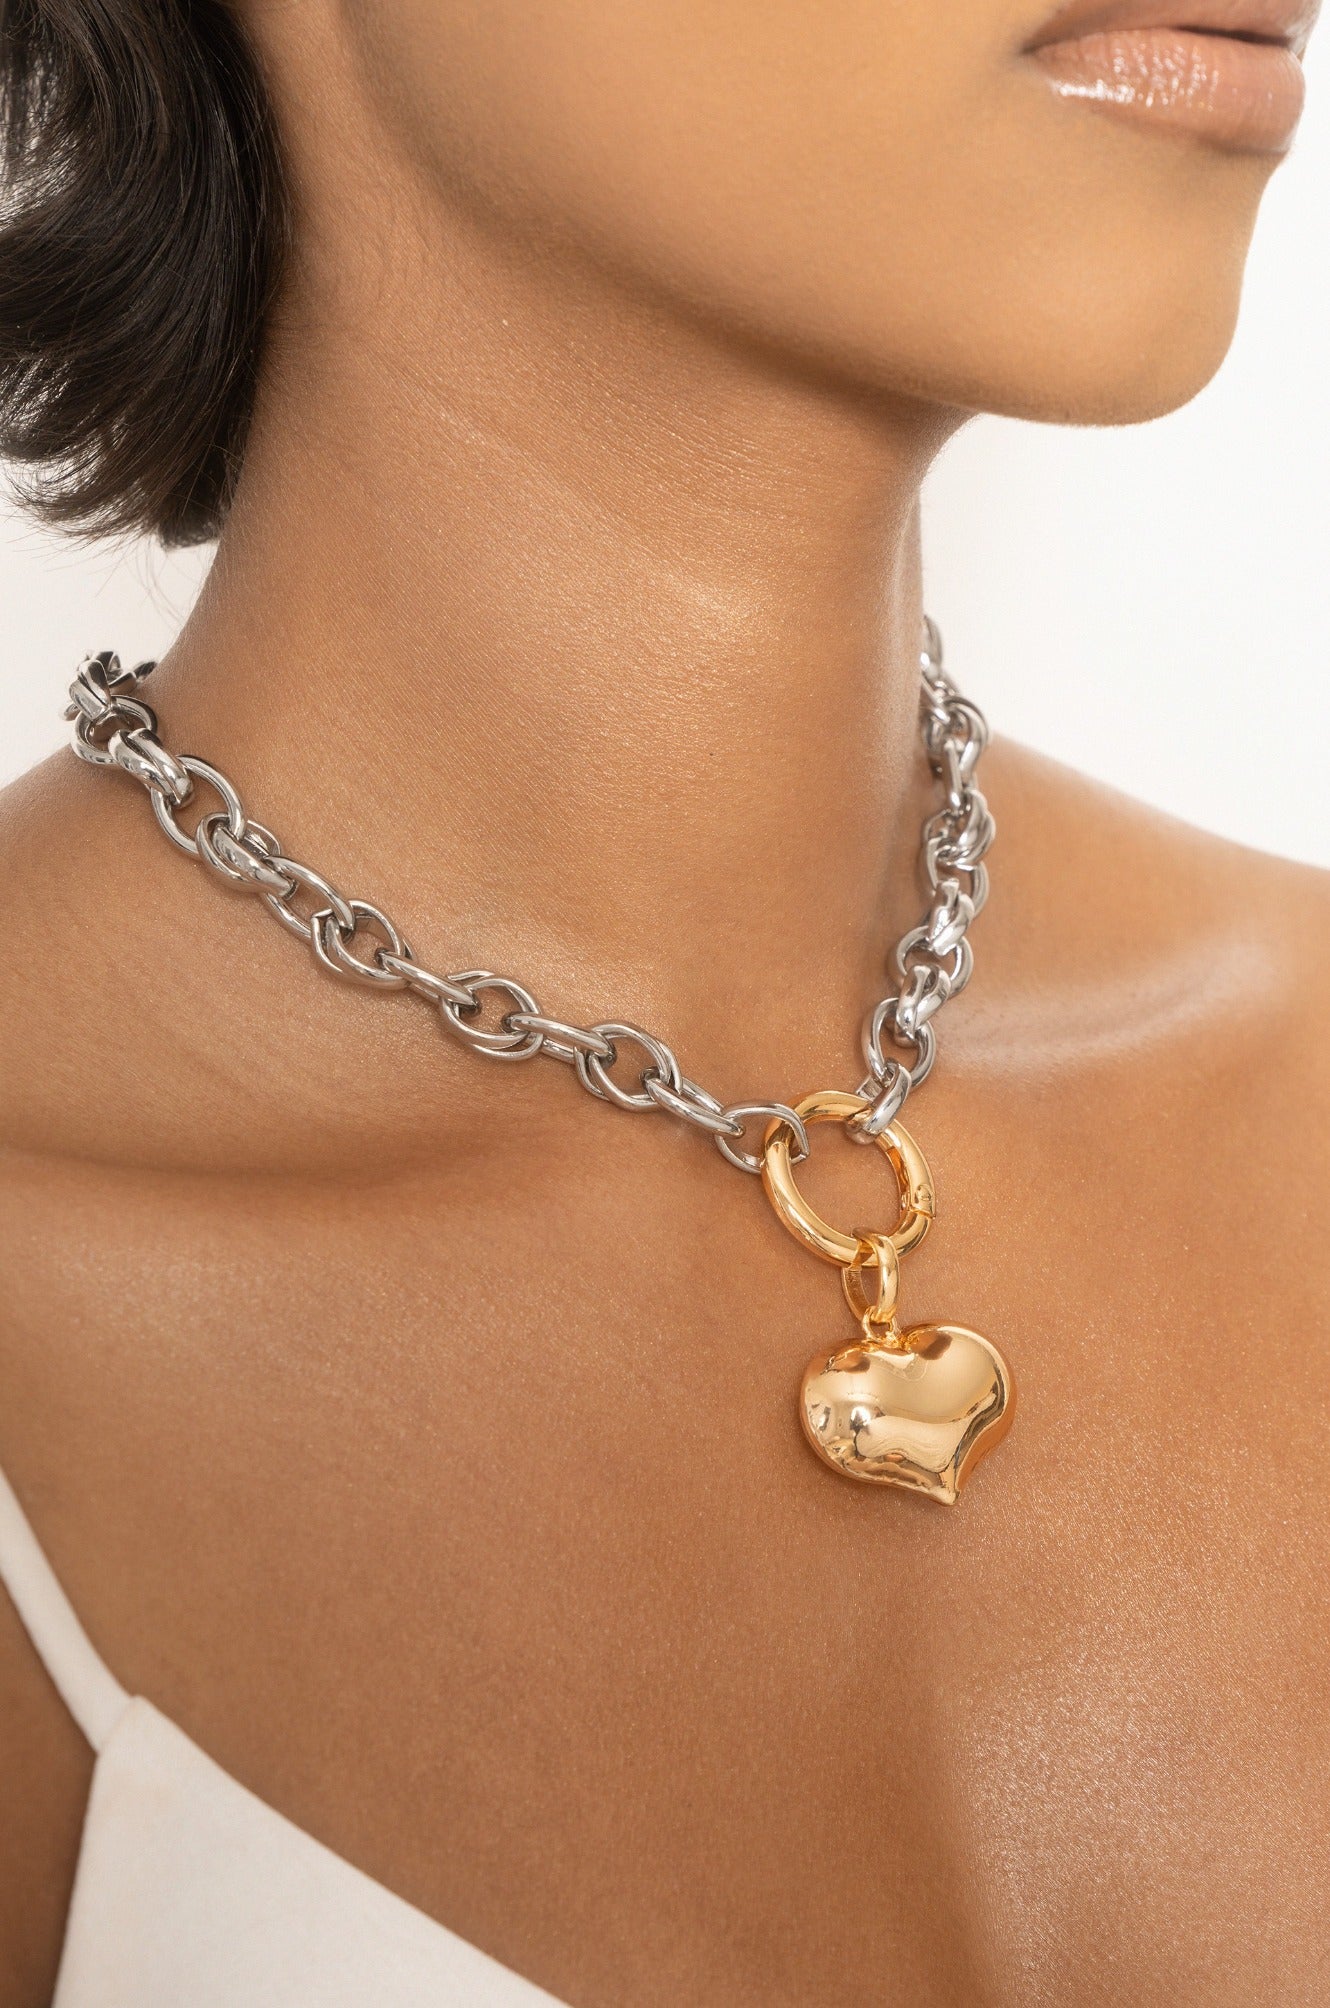 Locked in Love Mixed Metal Heart Necklace on model